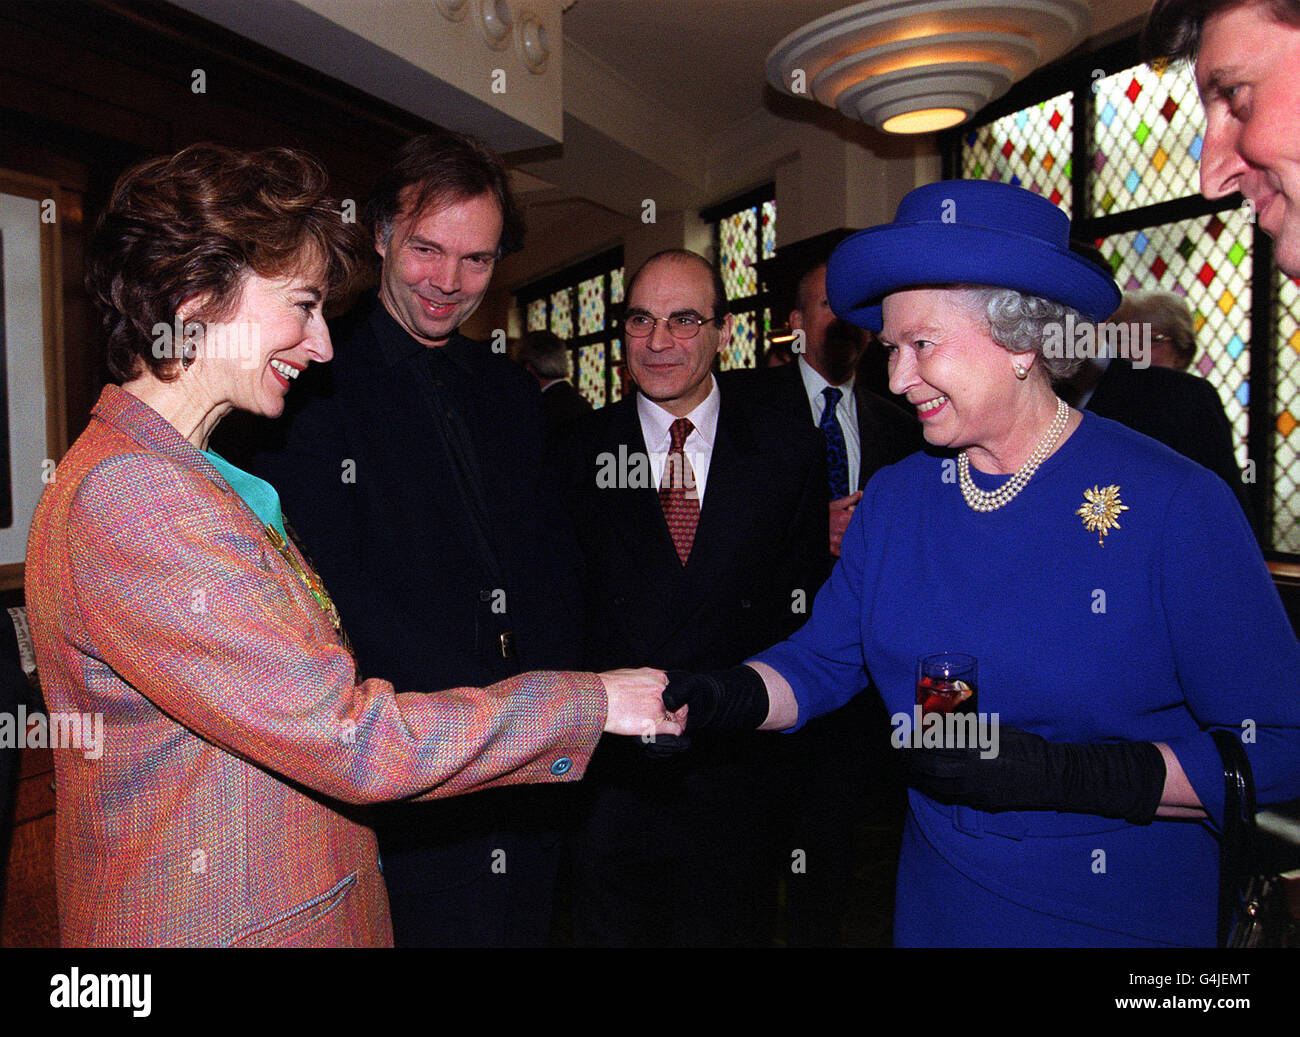 The Queen talks meets (from left) actress Maureen Lipman, Artistic Director of the Almeida Theatre Jonathan Kent and actor David Suchet during her visit to the Almeida Theatre in London, part of a tour by The Queen and the Duke to London's Theatreland. Stock Photo